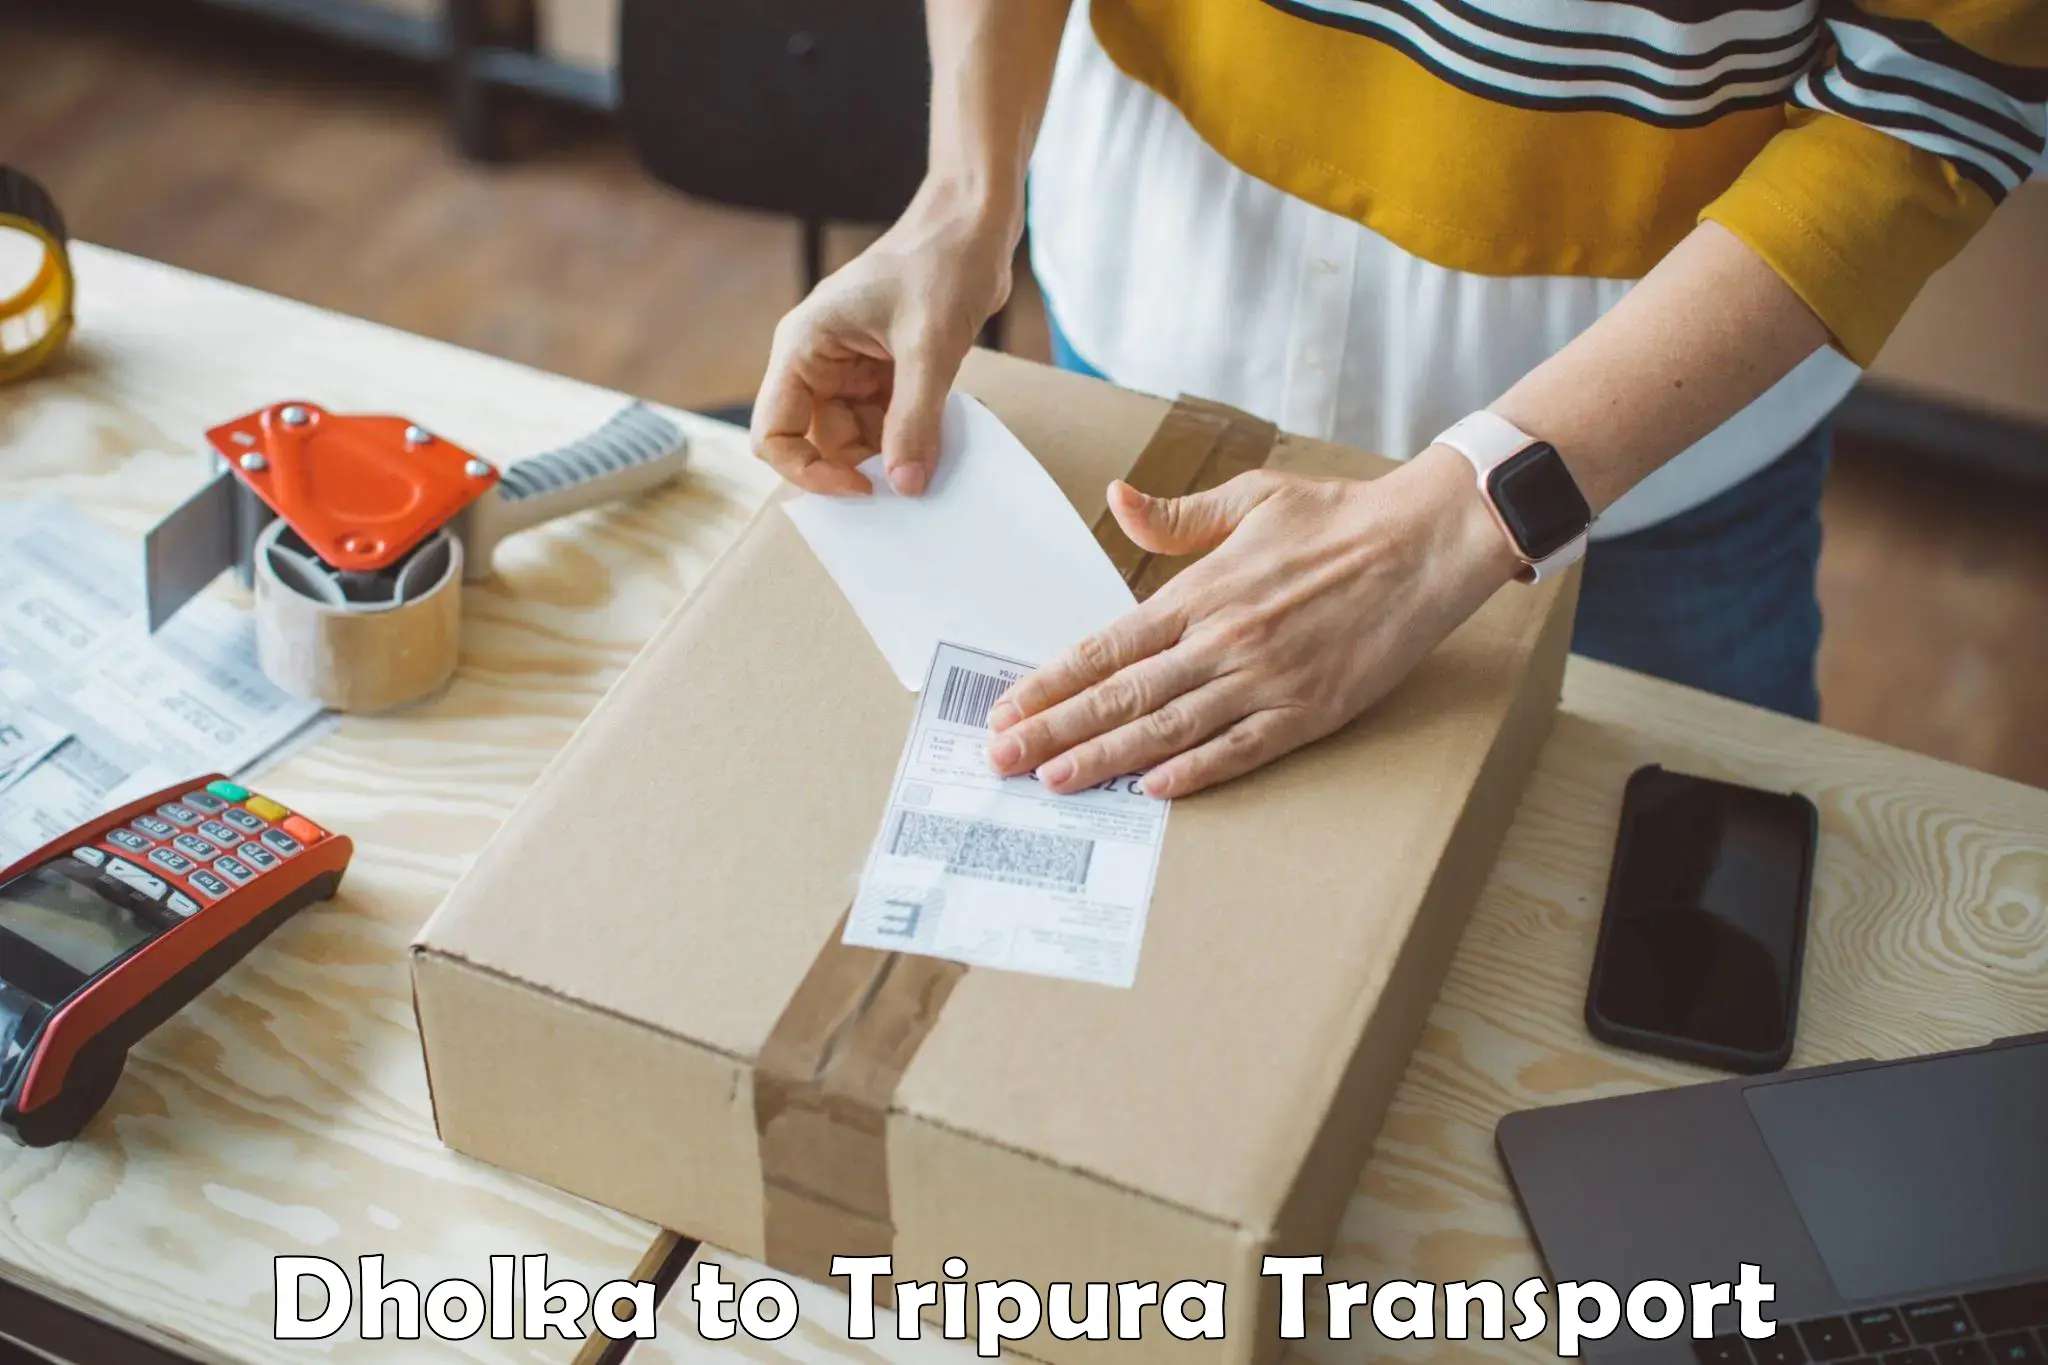 Truck transport companies in India Dholka to Dharmanagar